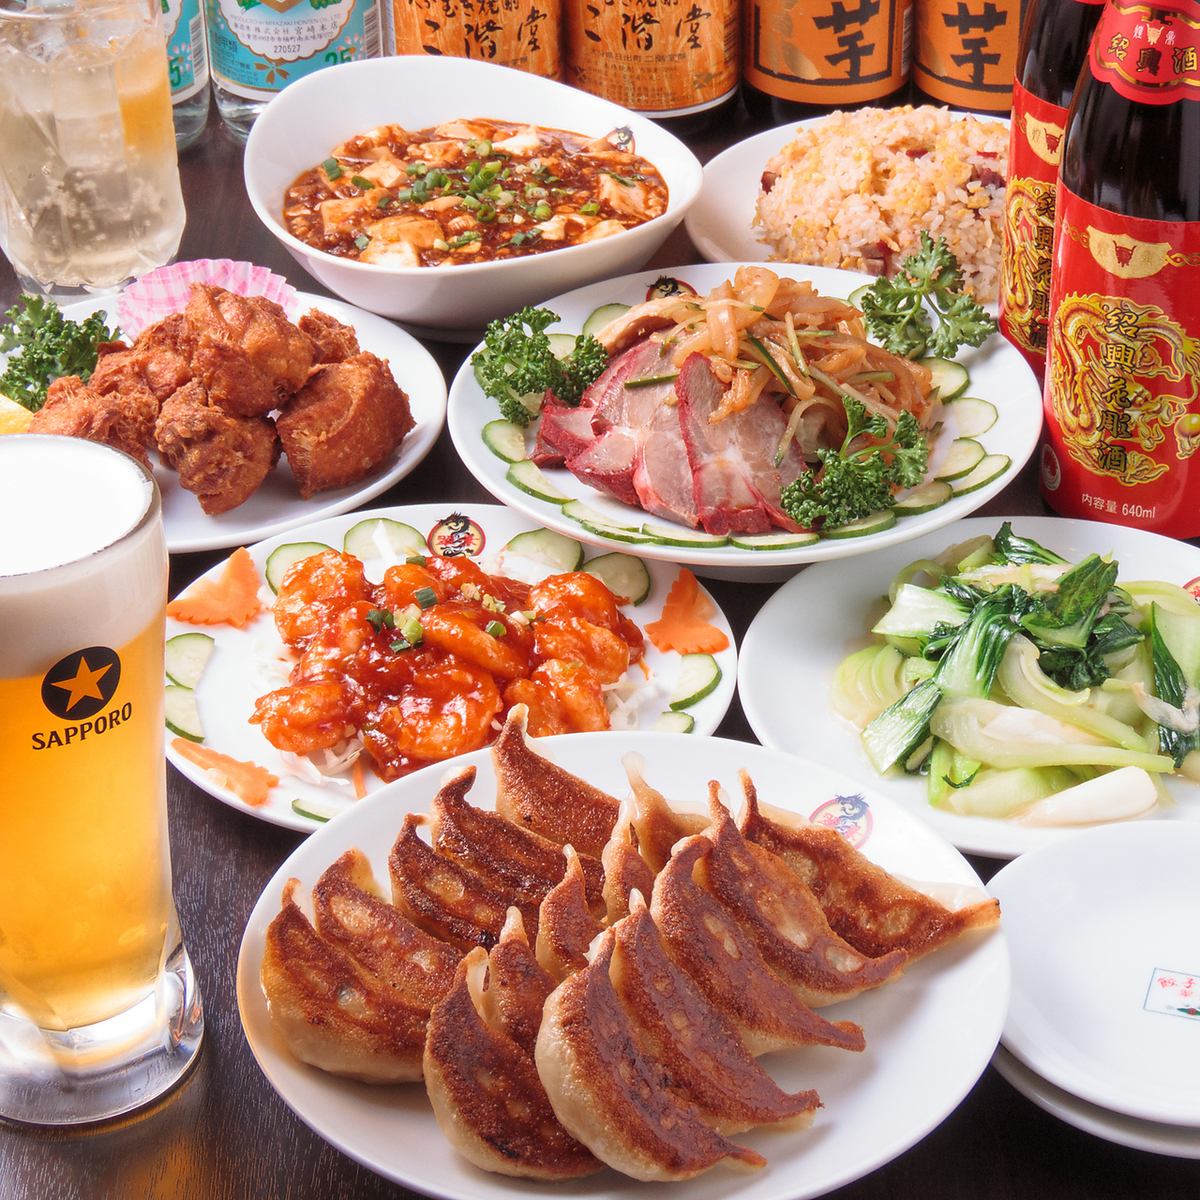 All-you-can-drink course for 2 hours and all-you-can-eat homemade aged gyoza dumplings for 3,850 yen♪